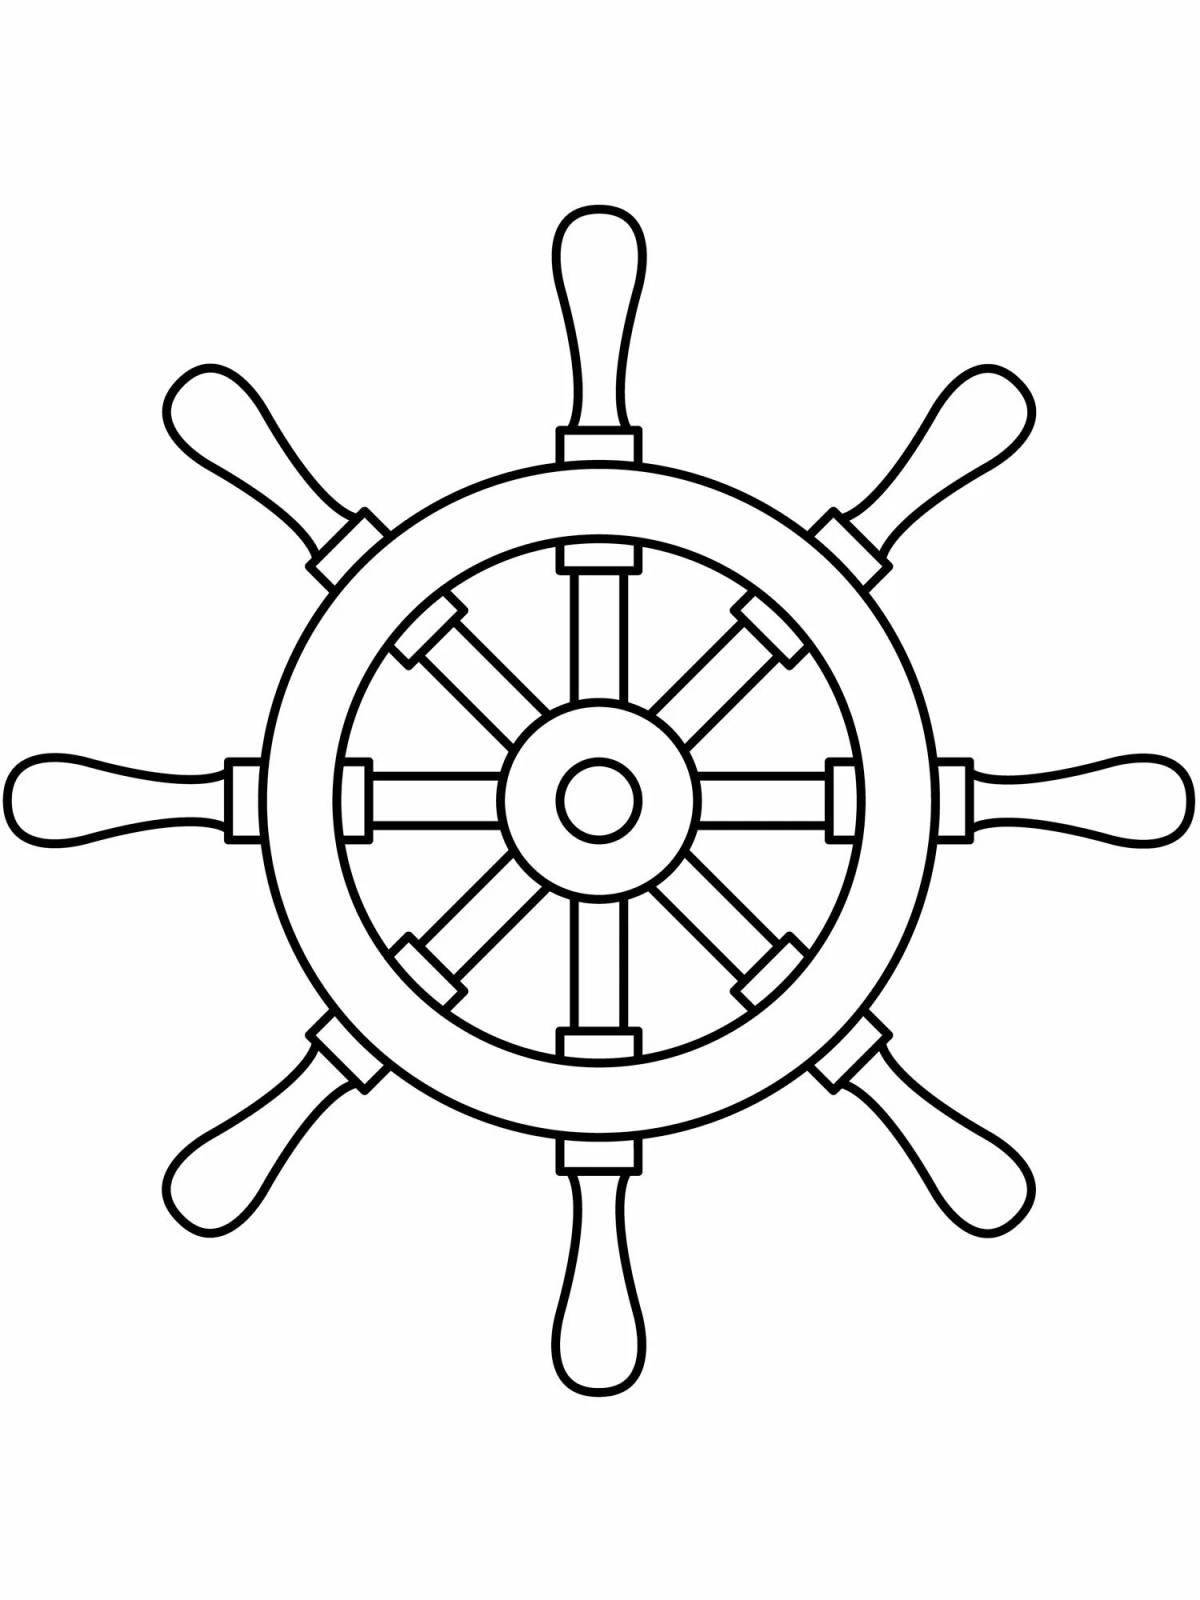 Mystical steering wheel coloring page